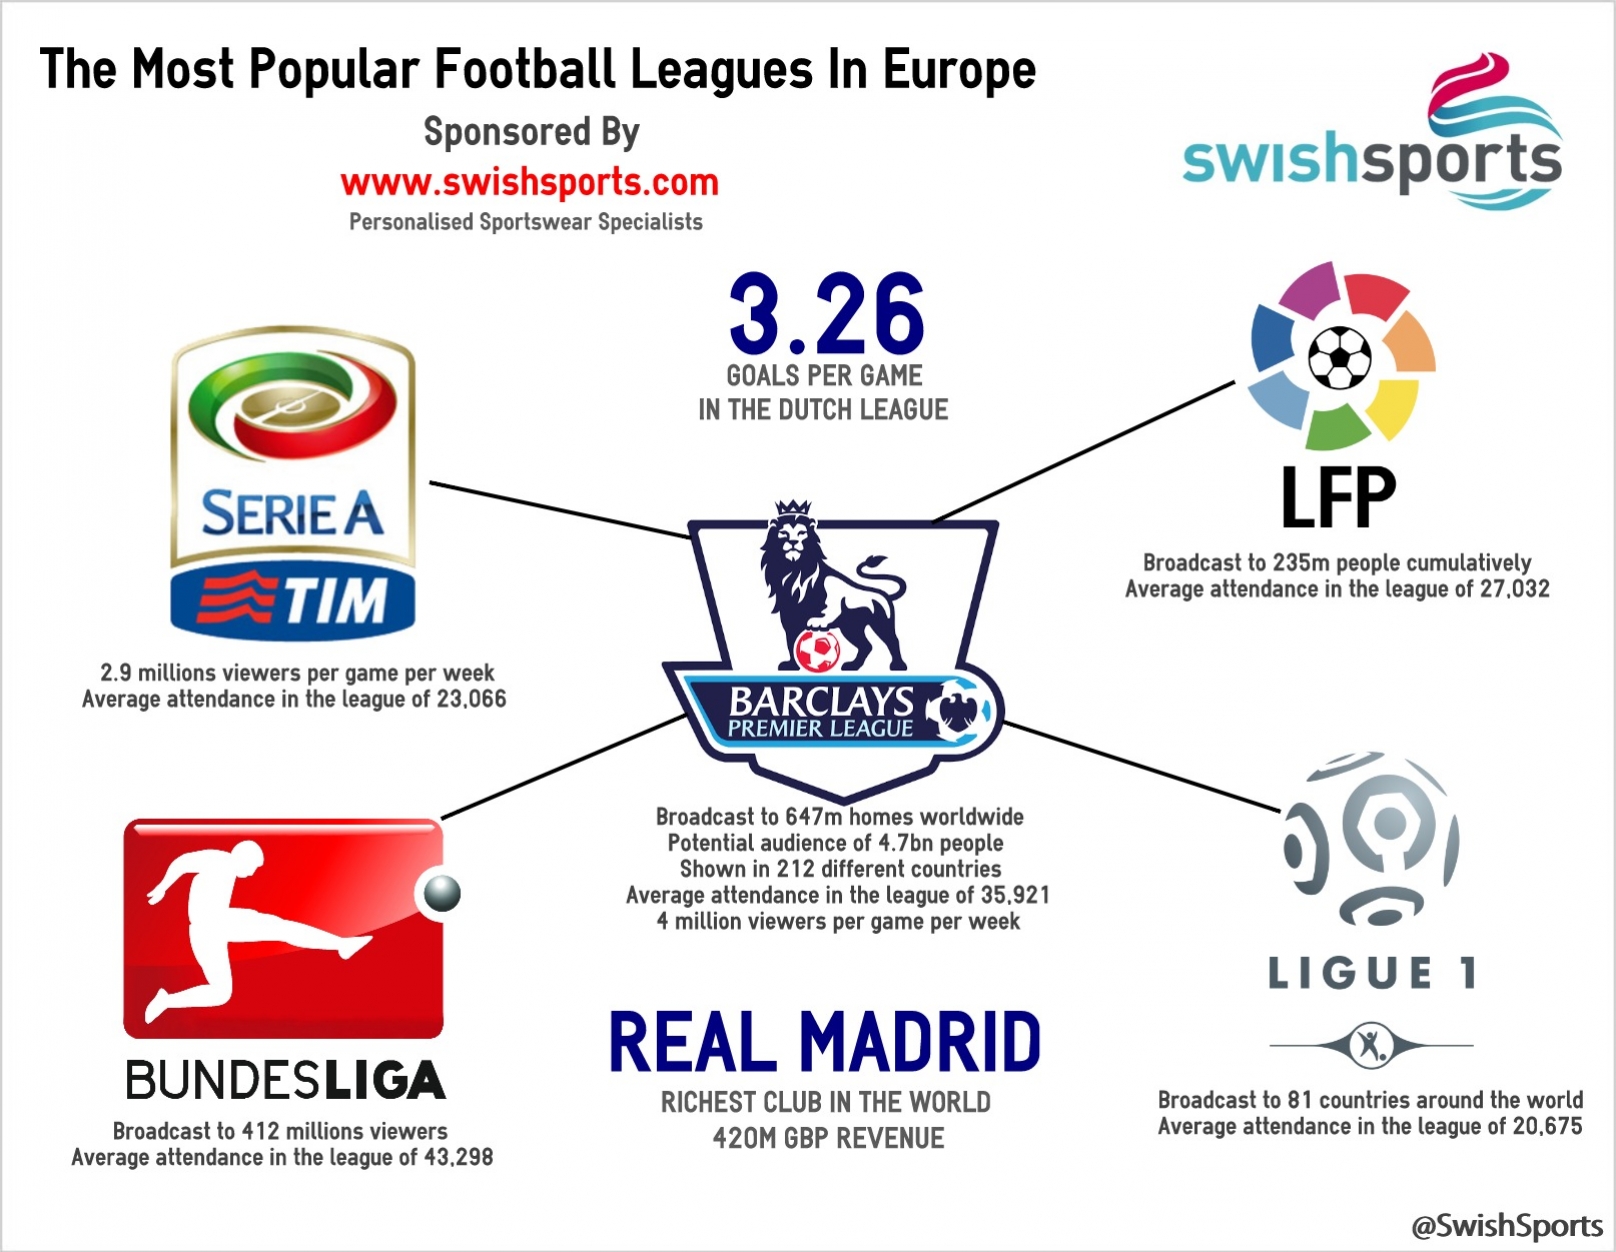 The Most Popular Football Leagues In Europe Visual.ly